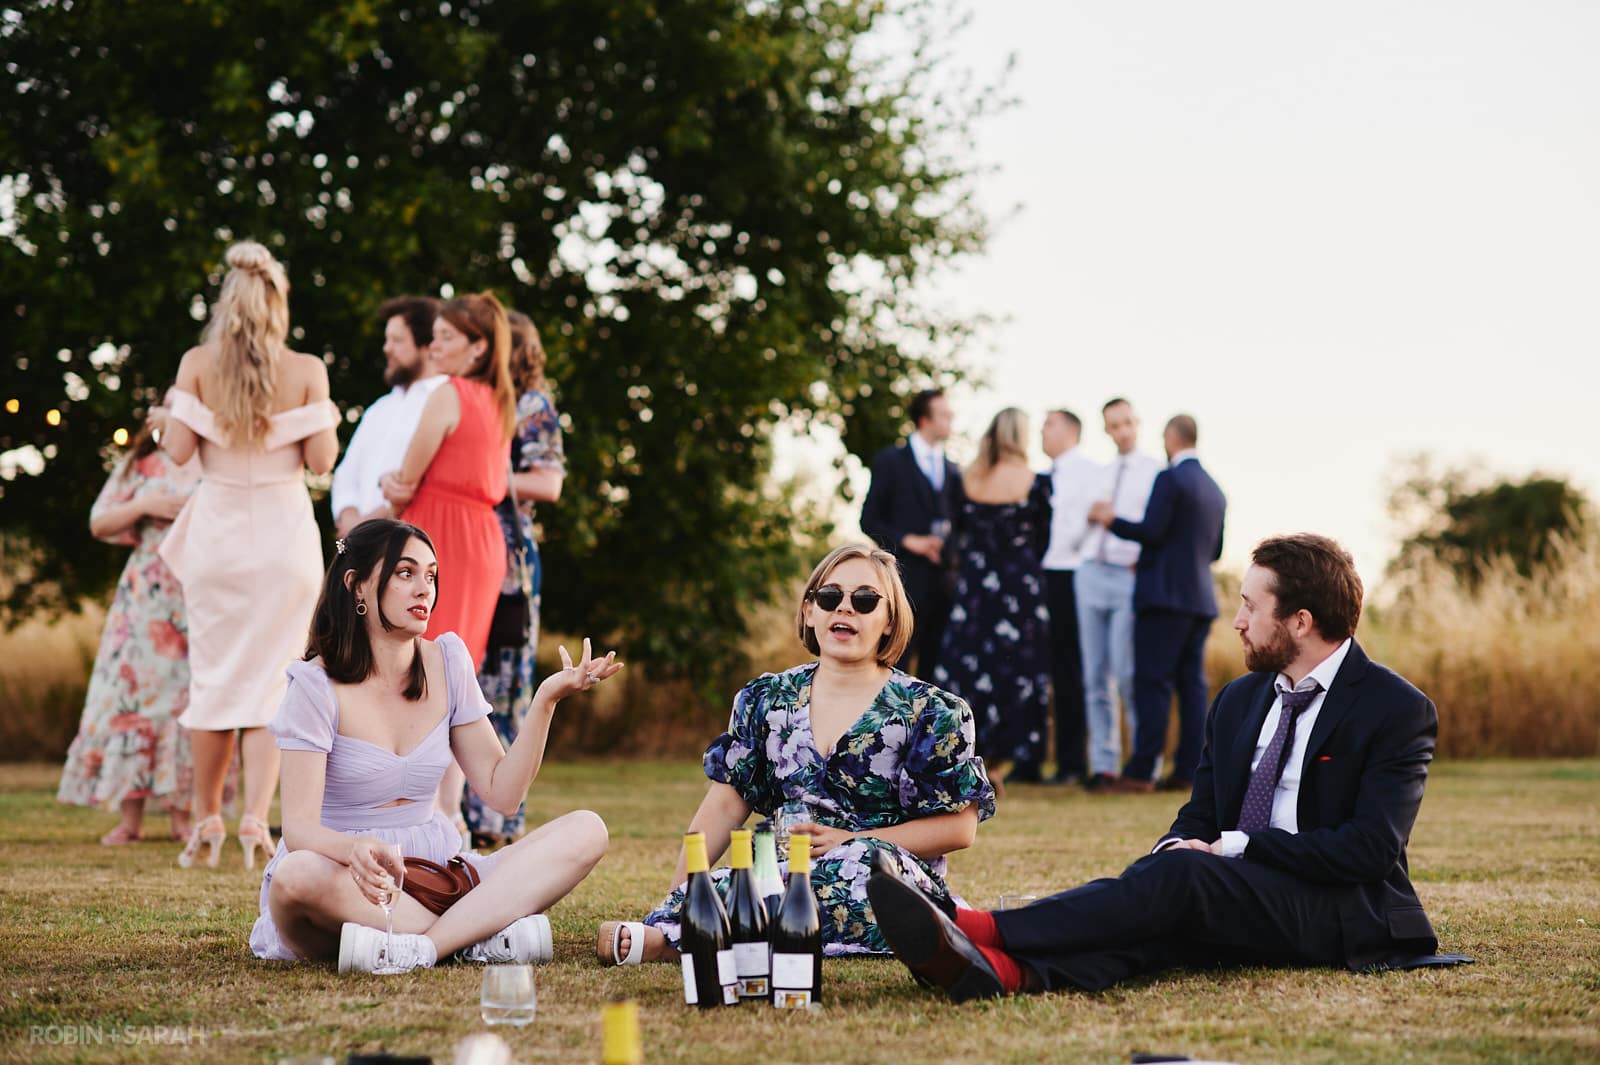 Wedding guests chat and relax outside in evening light